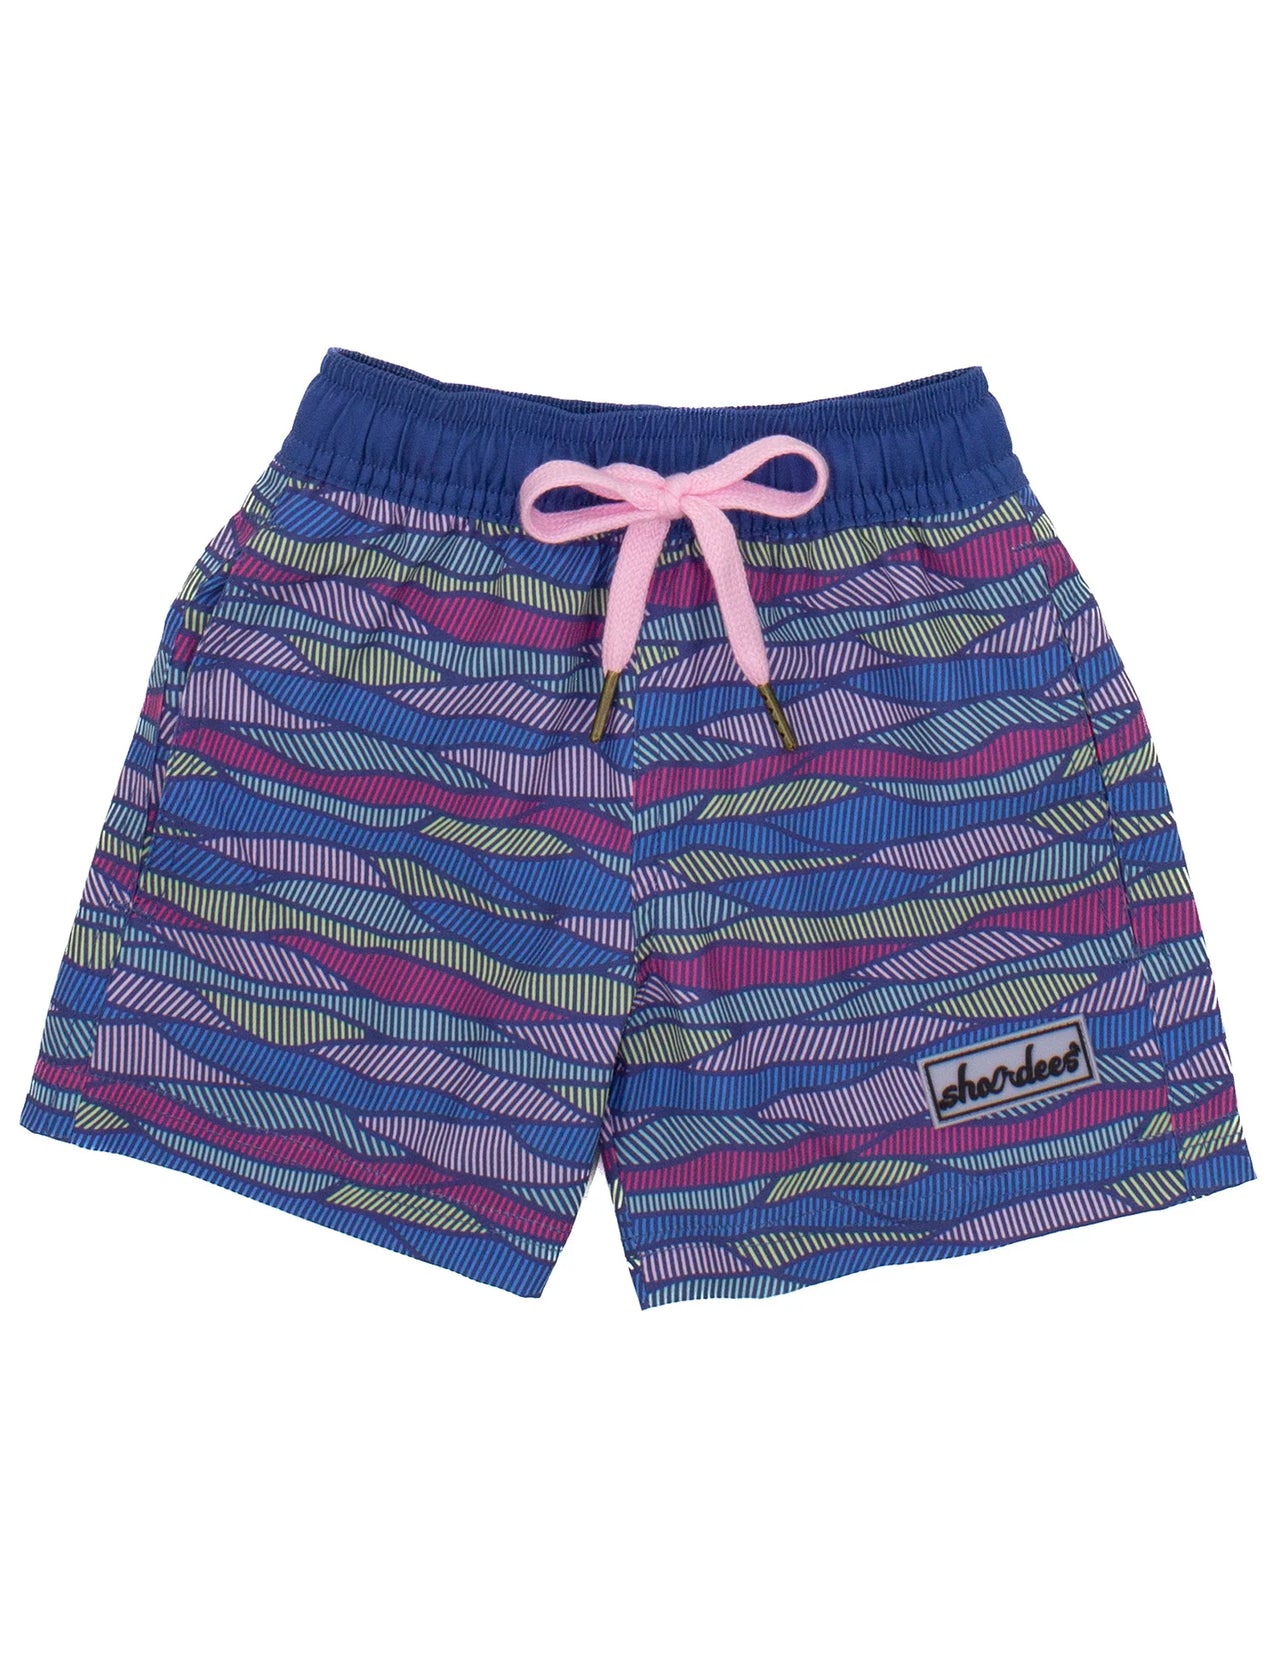 A pair of Properly Tied Youth - Boys Shordee Malibu Wave Swim Trunks laid out on a white surface. The swim trunks feature a vibrant wave pattern in shades of blue and teal, with an elastic waistband for a comfortable fit. The image also includes a matching straw hat in the background, available in both youth and adult sizes.